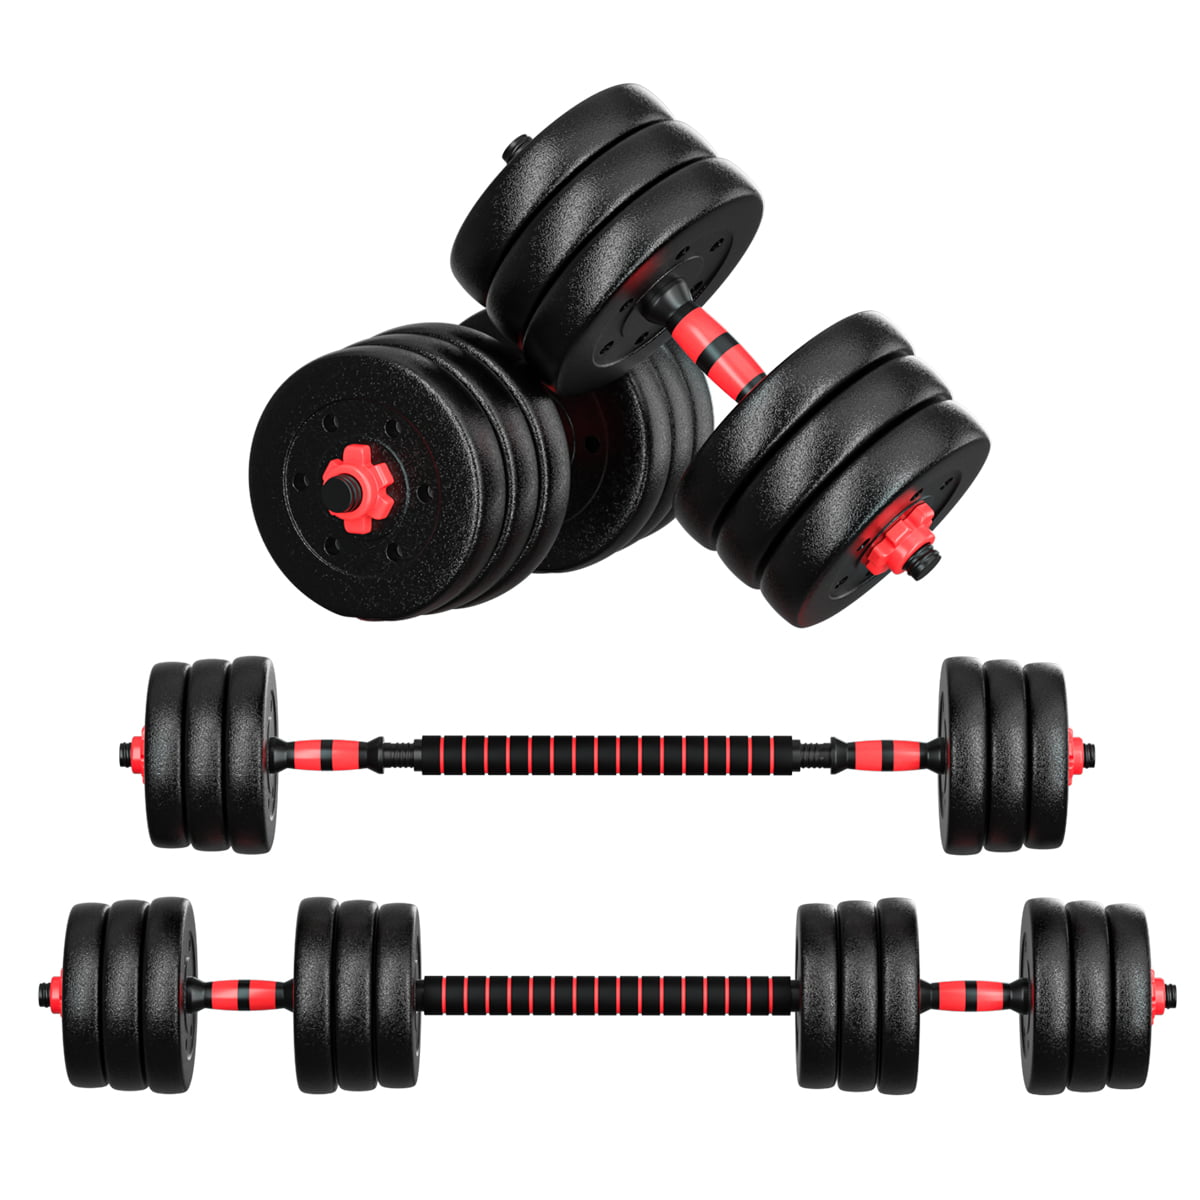 Details about   Totall 110LB Weight Dumbbell Set Cap Gym Barbell Plates Body Workout Adjustable 